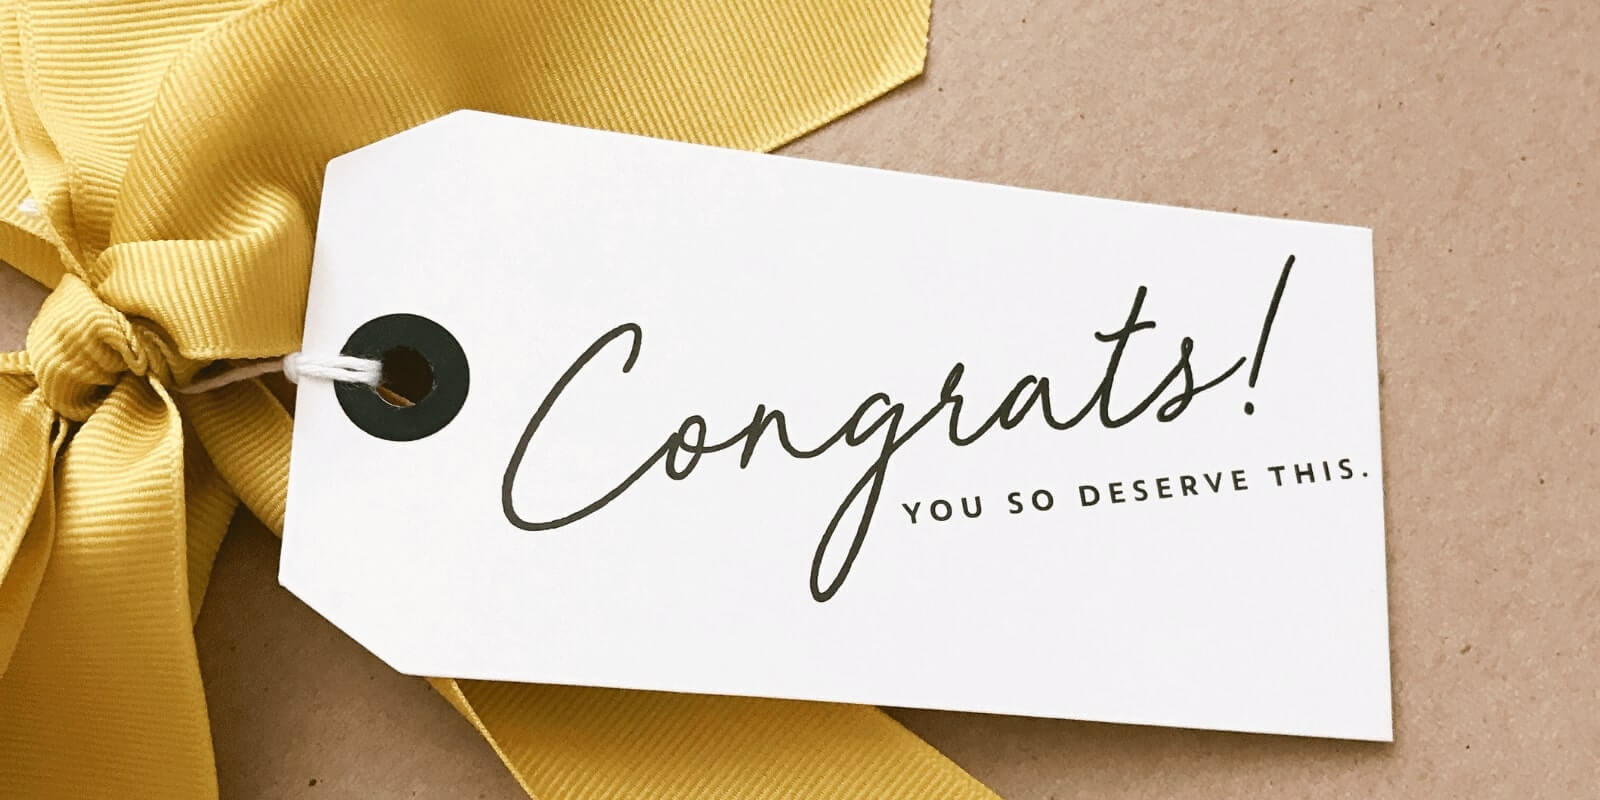 Gift box with "Congrats you so deserve this" card